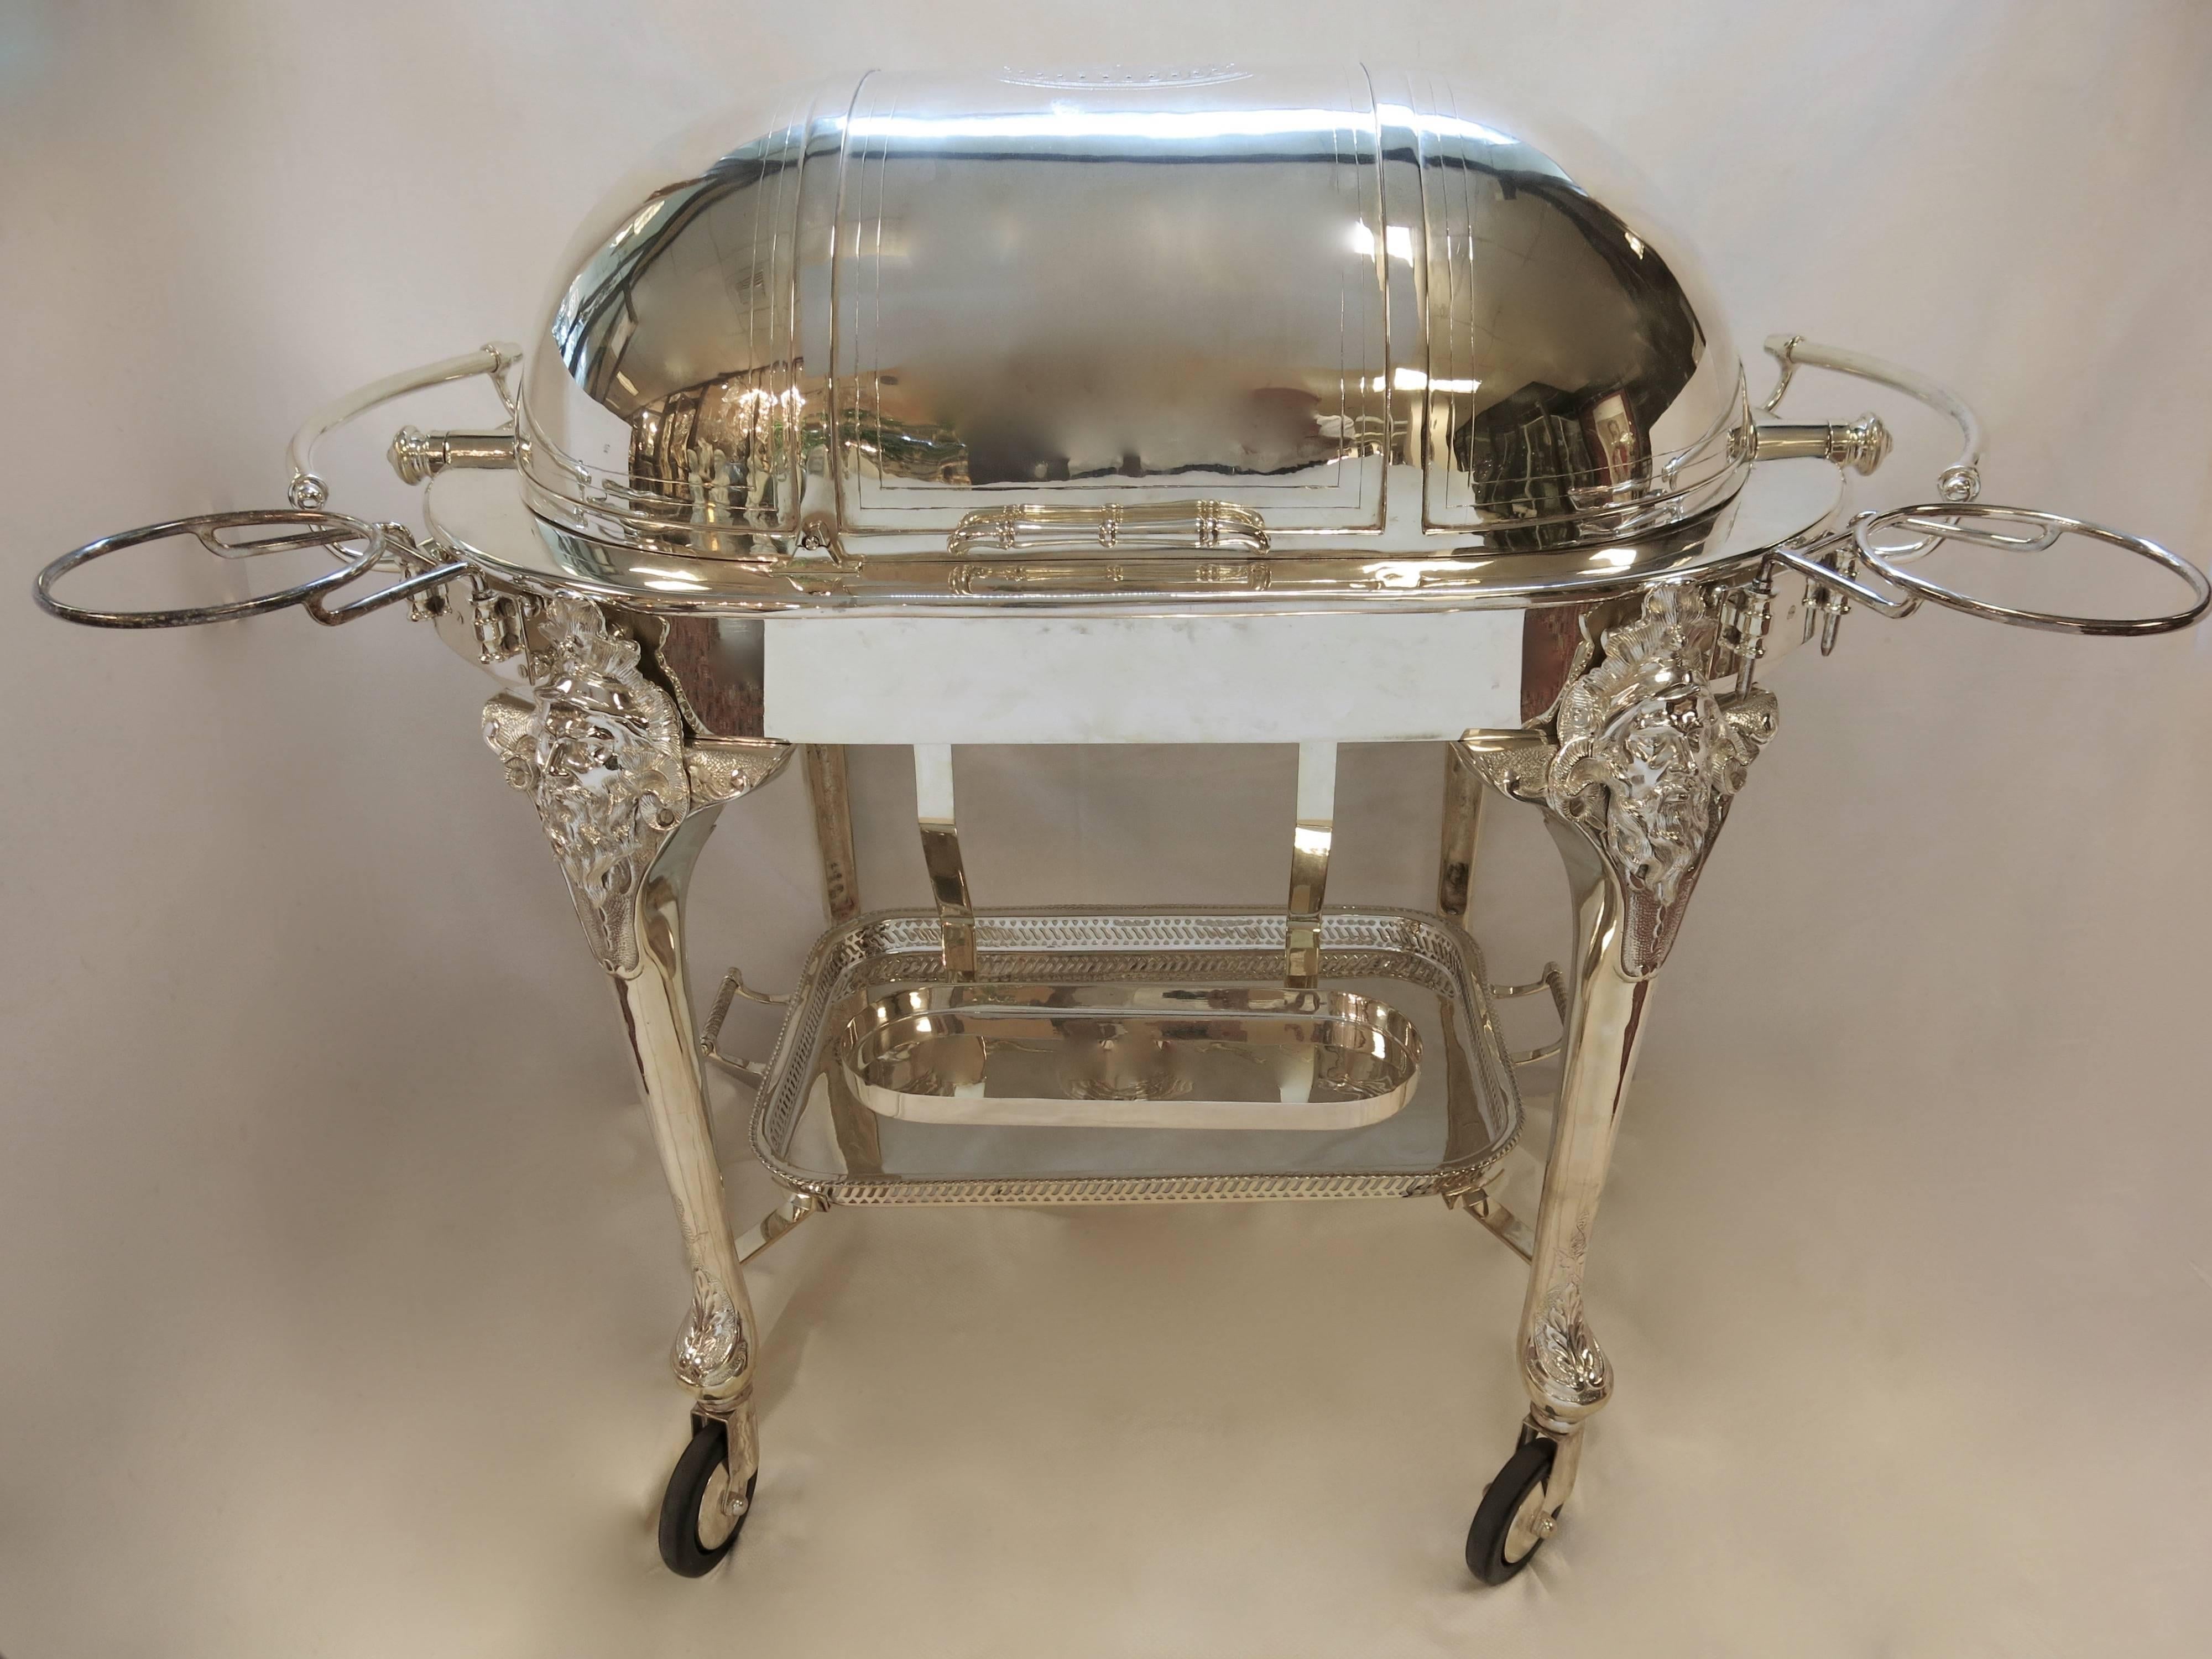 Stunning, large, decorative and usable Sheffield silver plate beef trolley. Complete with hot water jacket, sauce pots, vegetable dish, carving tray, under tray and three burners. Bacchus mask caps on each of the legs, and detachable plate holder /